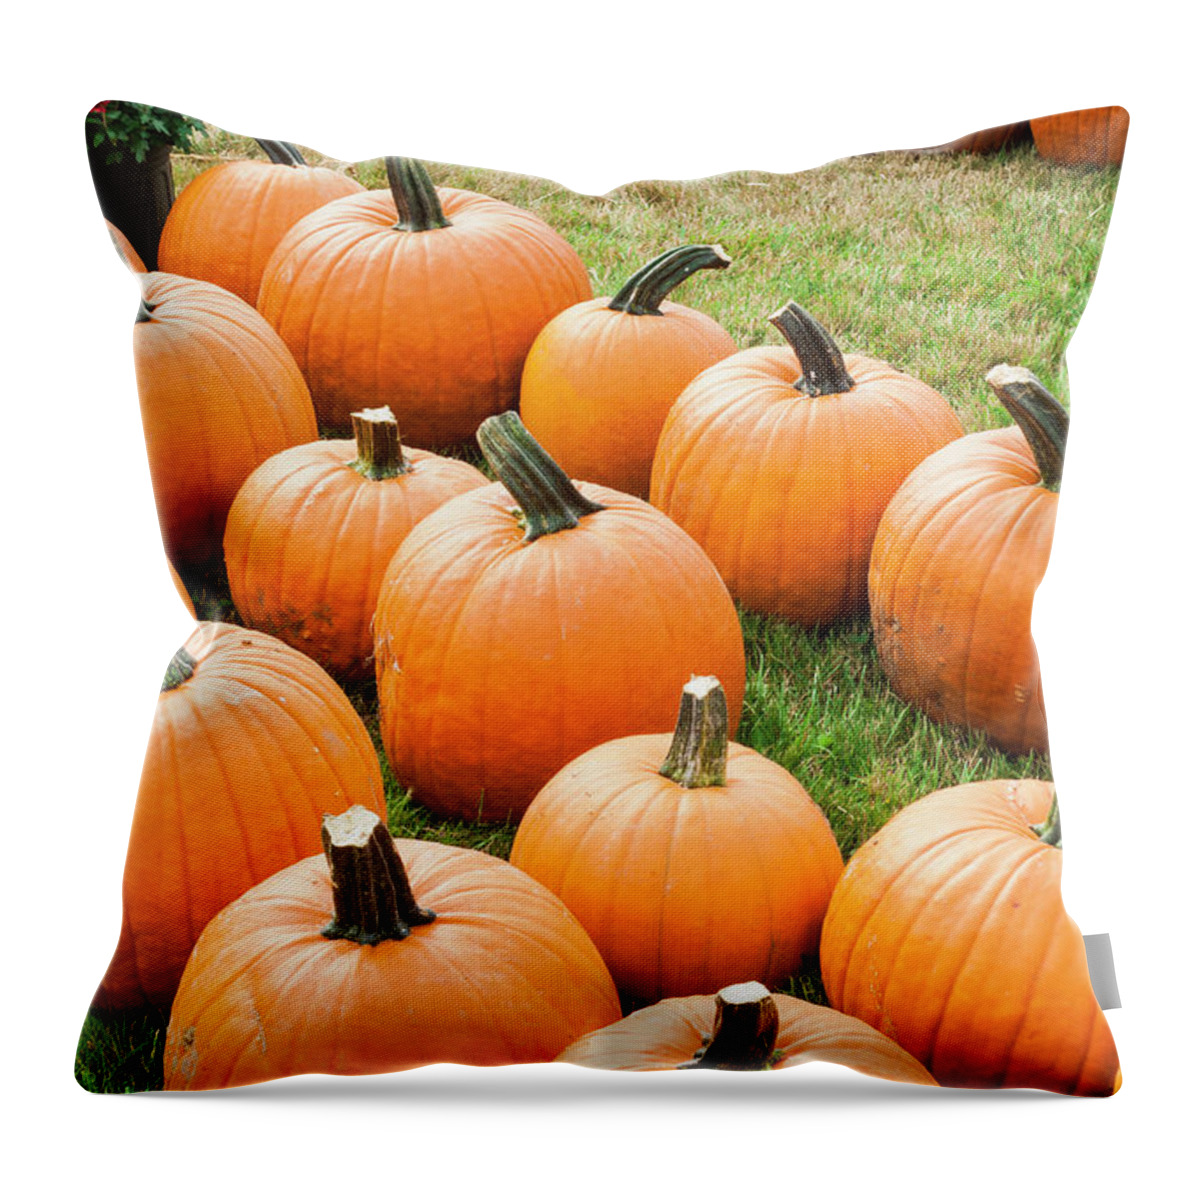 In A Row Throw Pillow featuring the photograph Pumpkins For Sale At A Farmers Market by Antonio M. Rosario